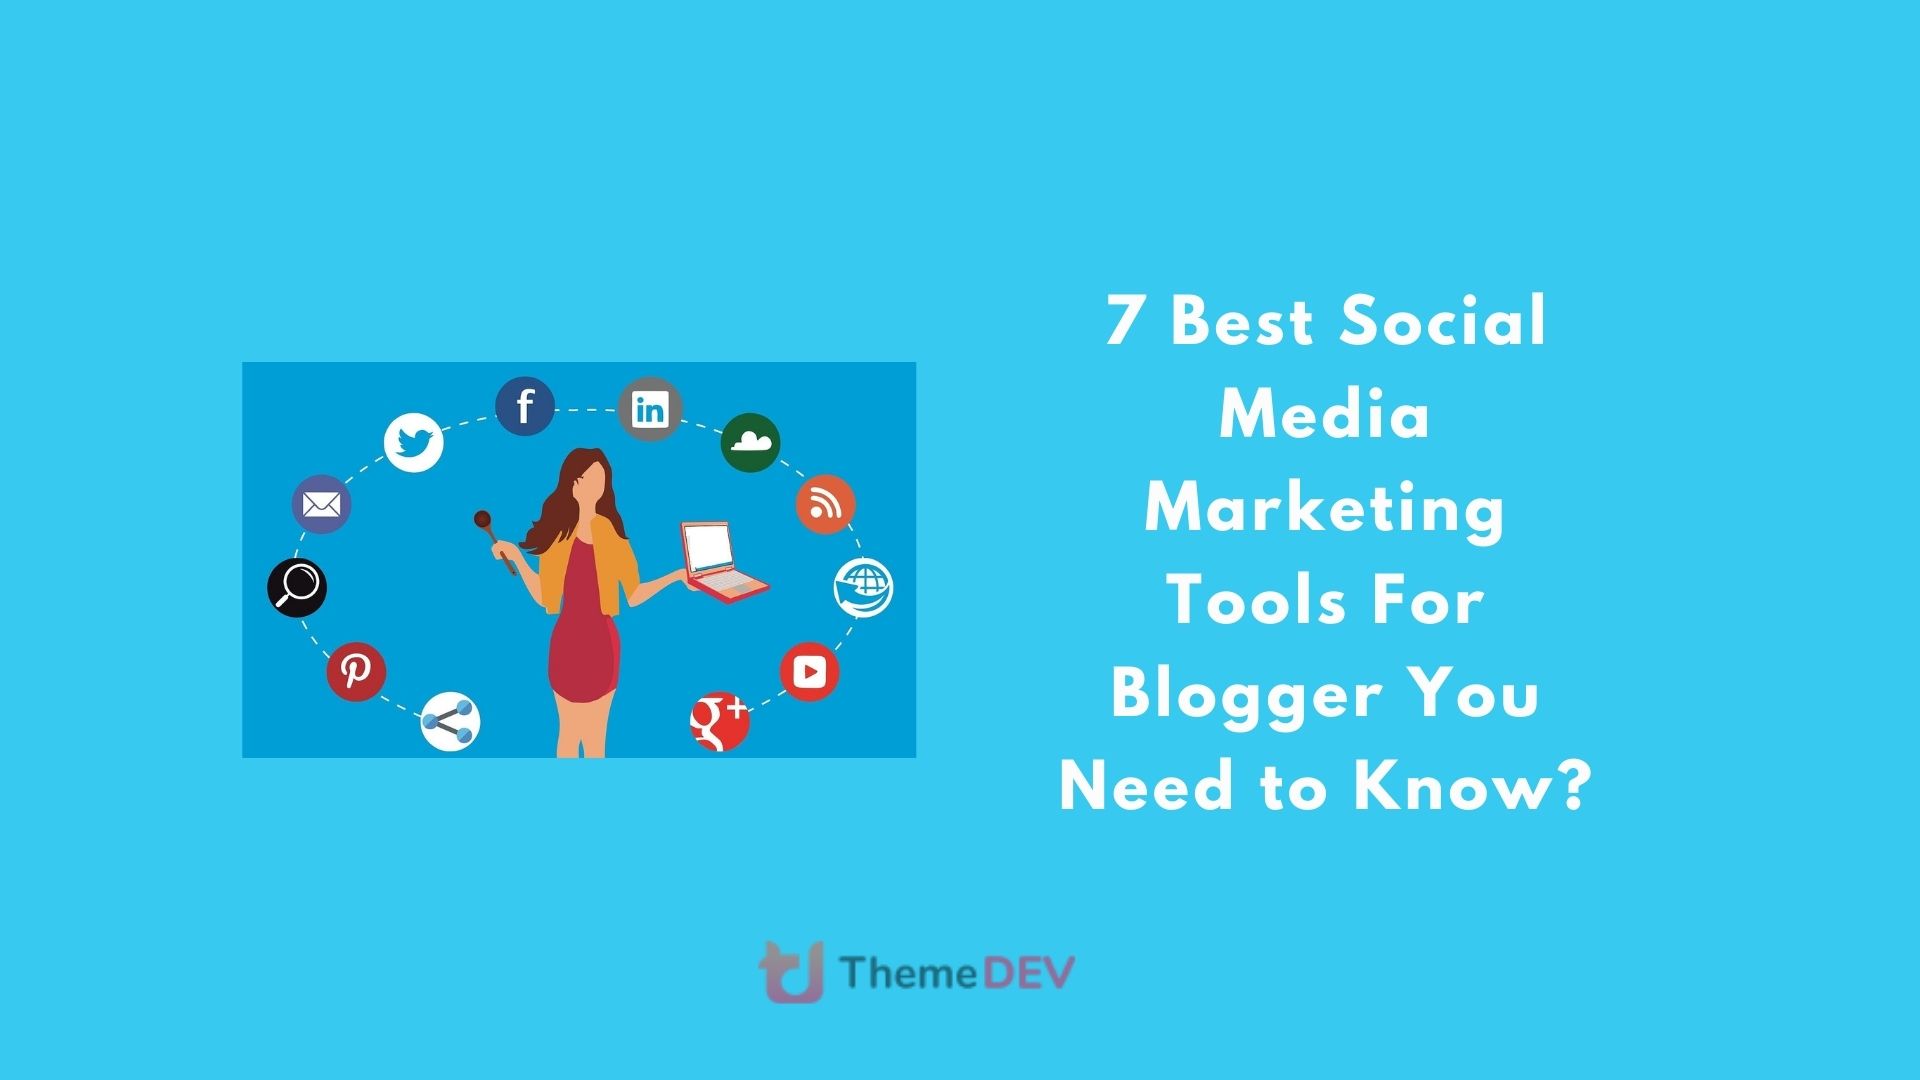 7 Best Social Media Marketing Tools For Blogger You Need to Know?